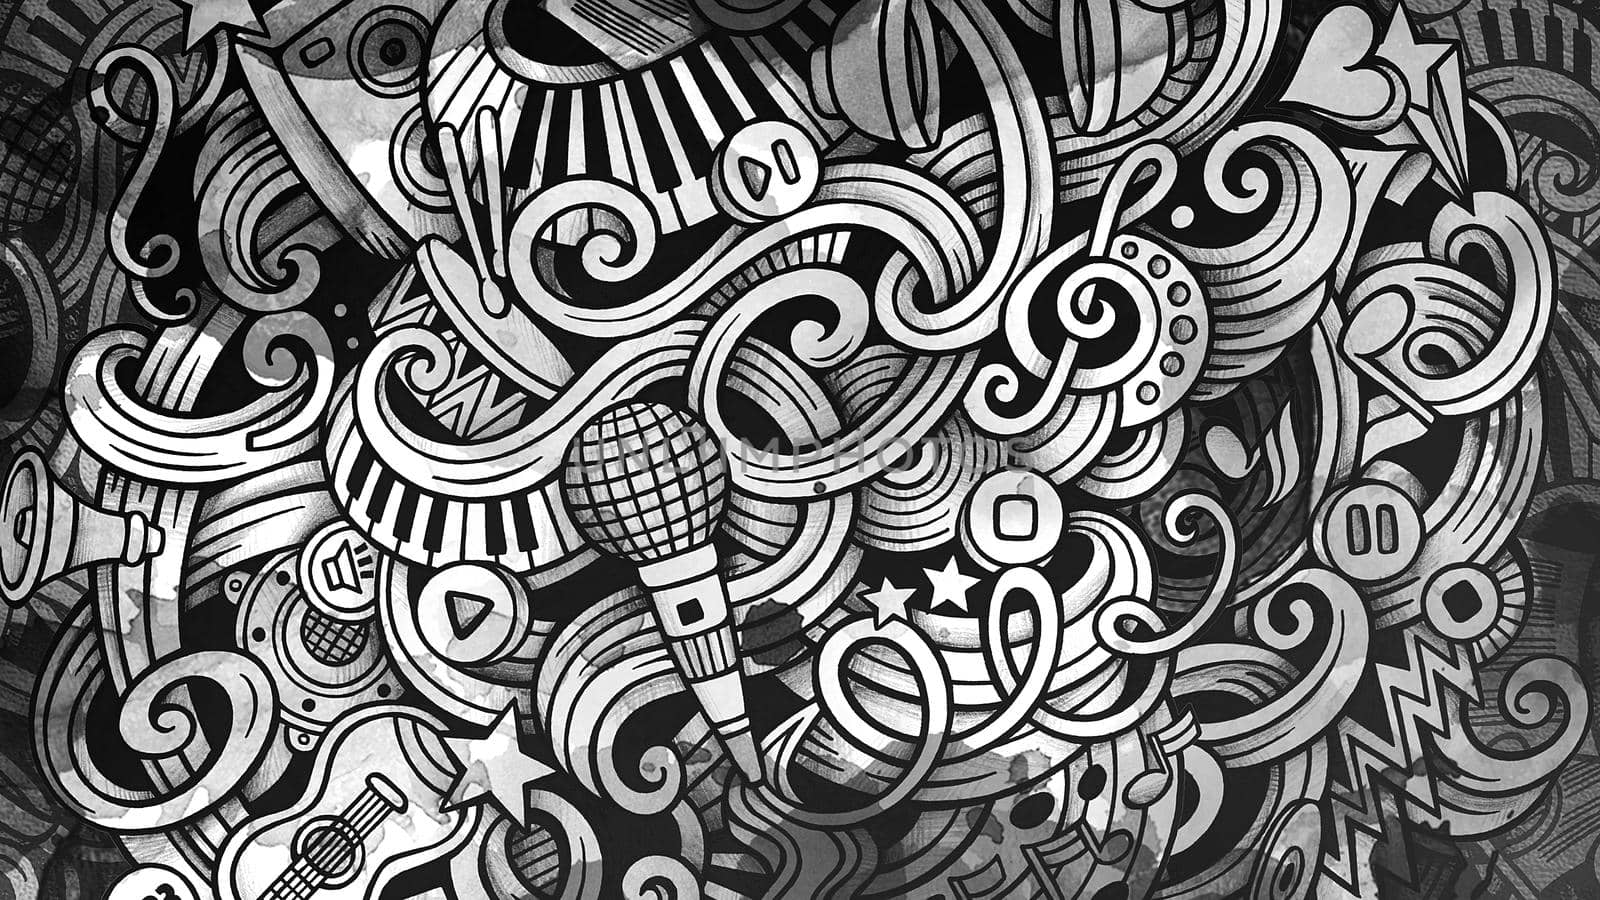 Doodles Musical illustration. Creative music background. Graphic by balabolka